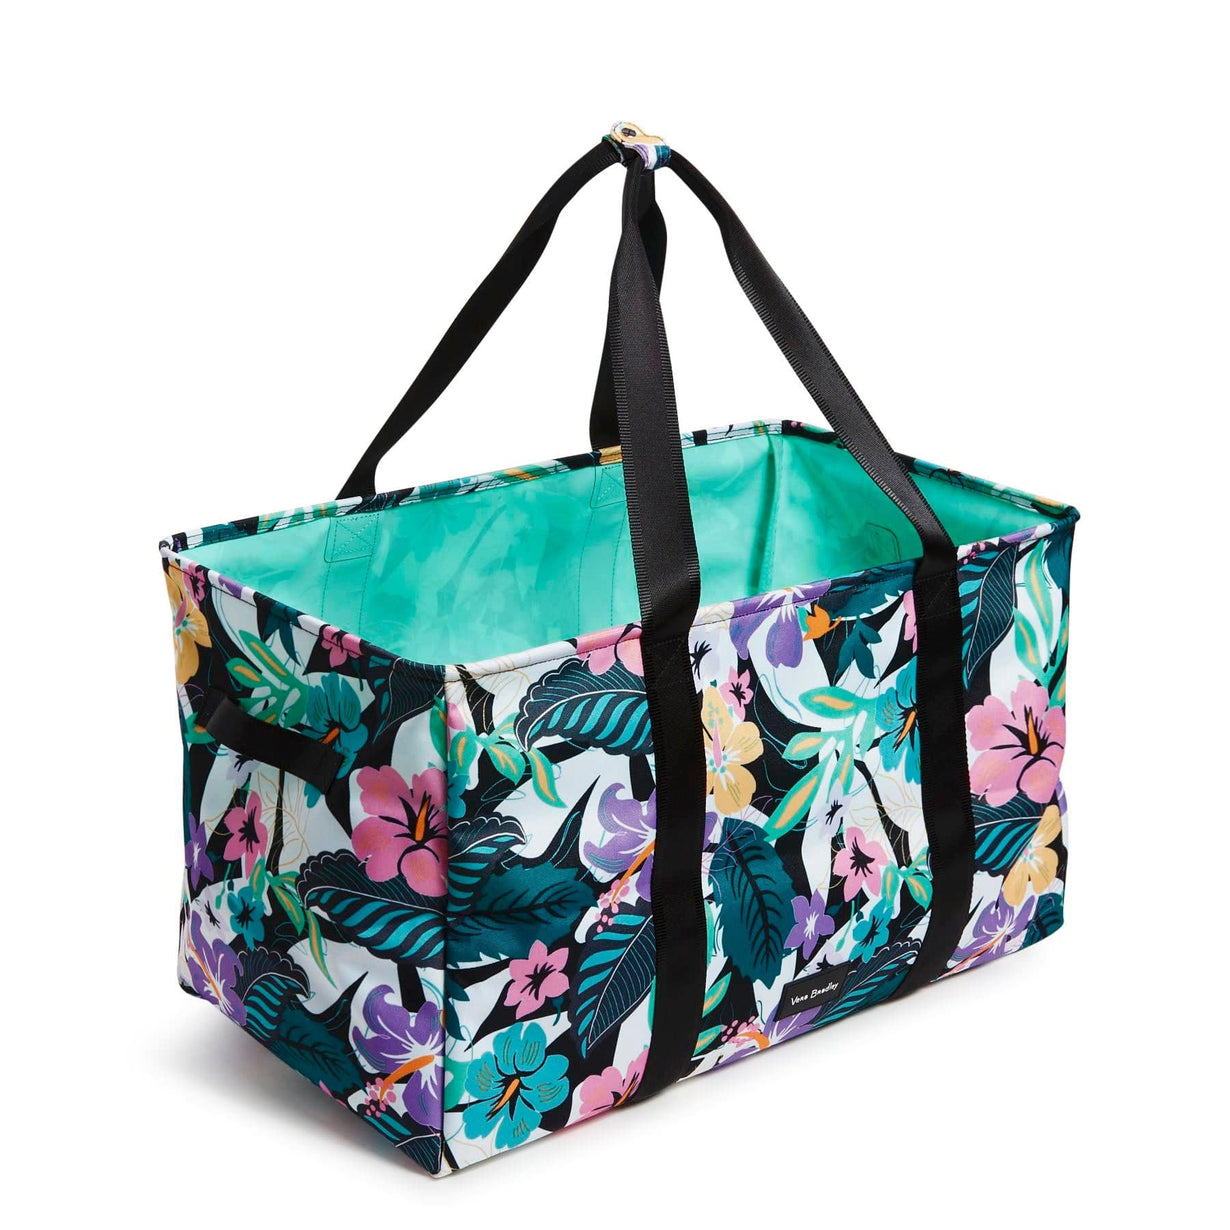 Large vs. Small Utility Totes (and 4 more!) - Thirty-One Gifts